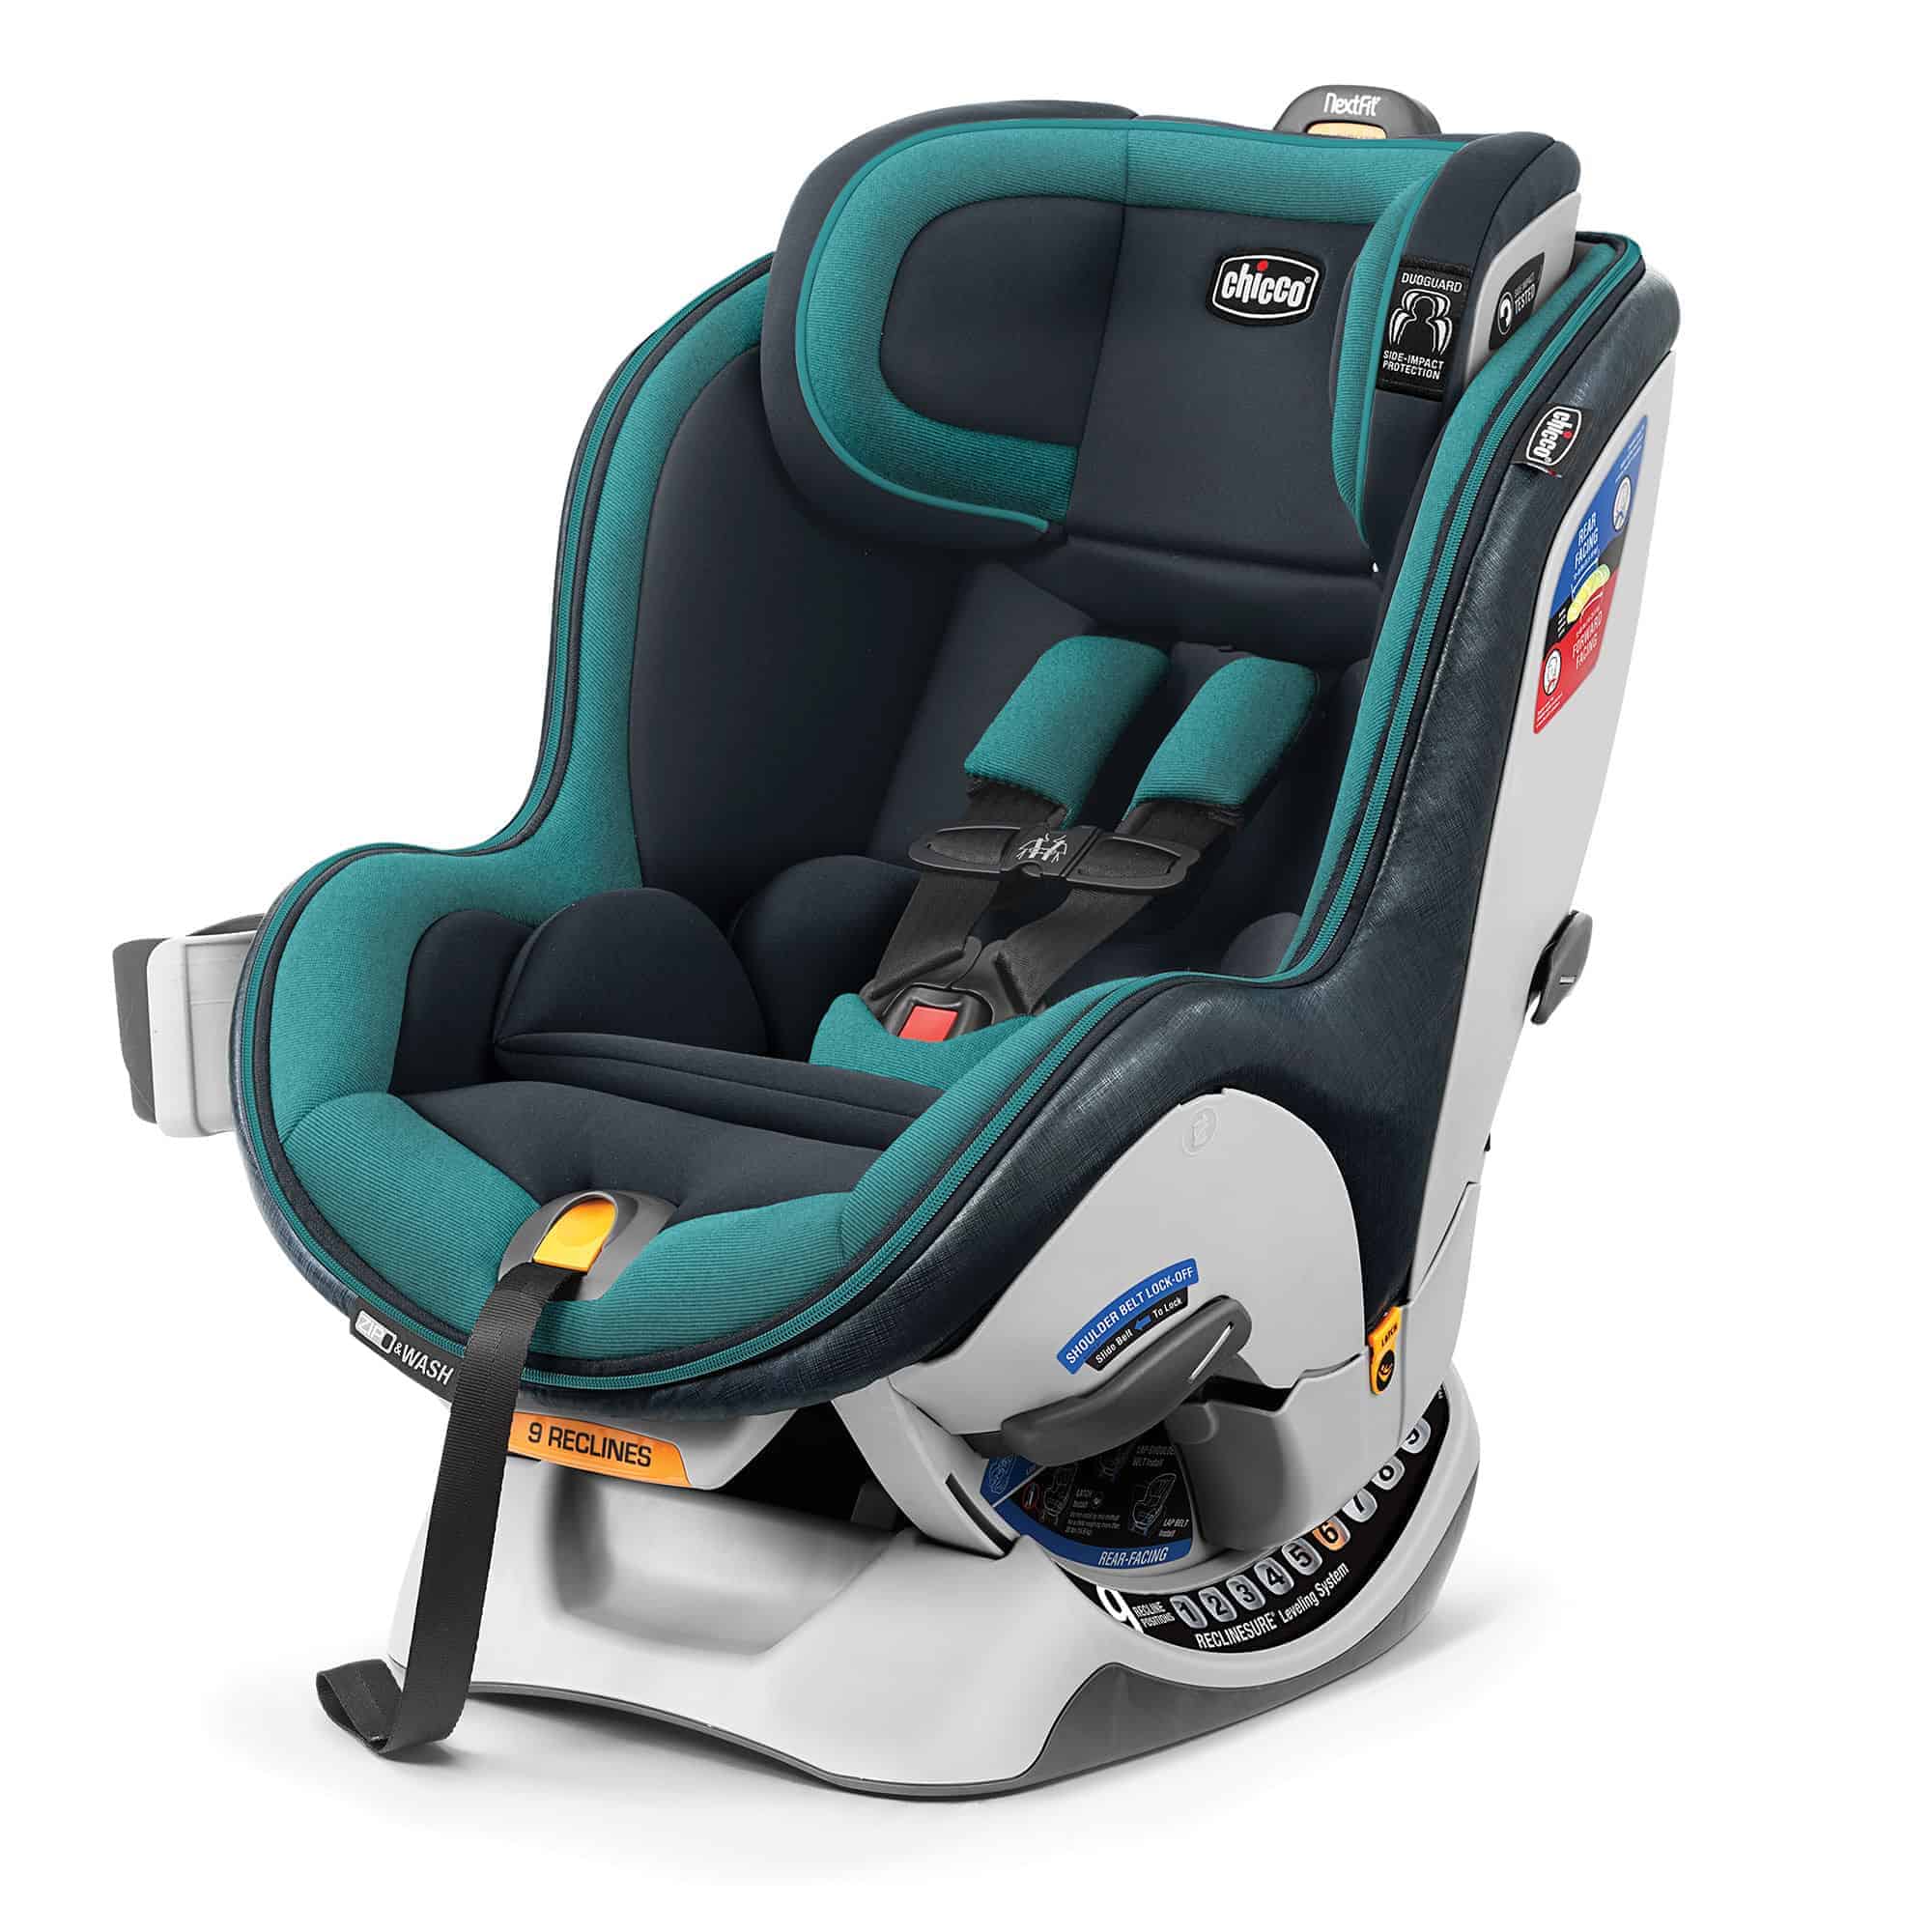 The Chicco NextFit Zip car seat